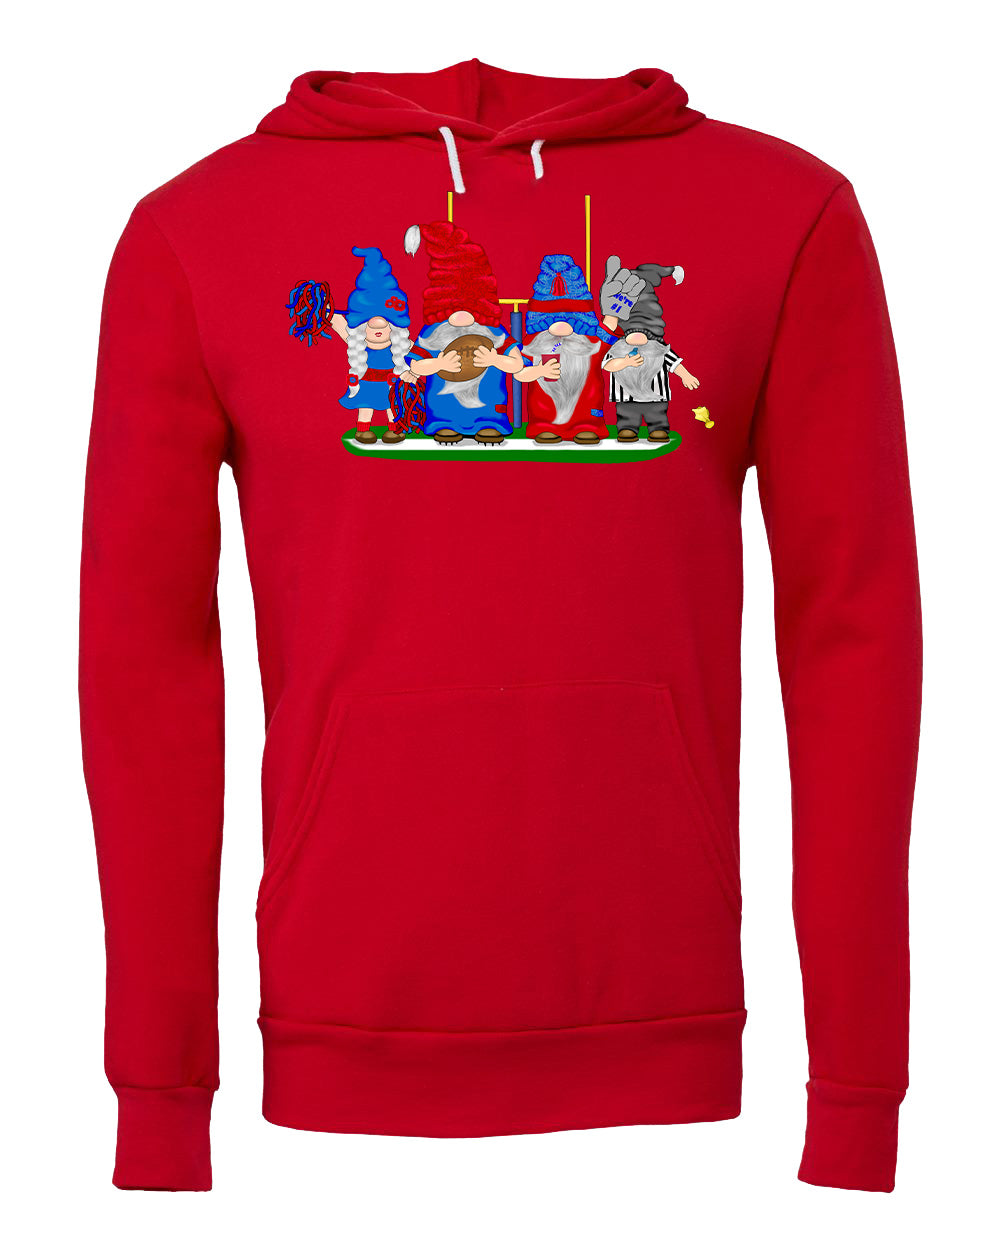 Steel Blue & Red Football Gnomes (similar to Houston) on Hoodie